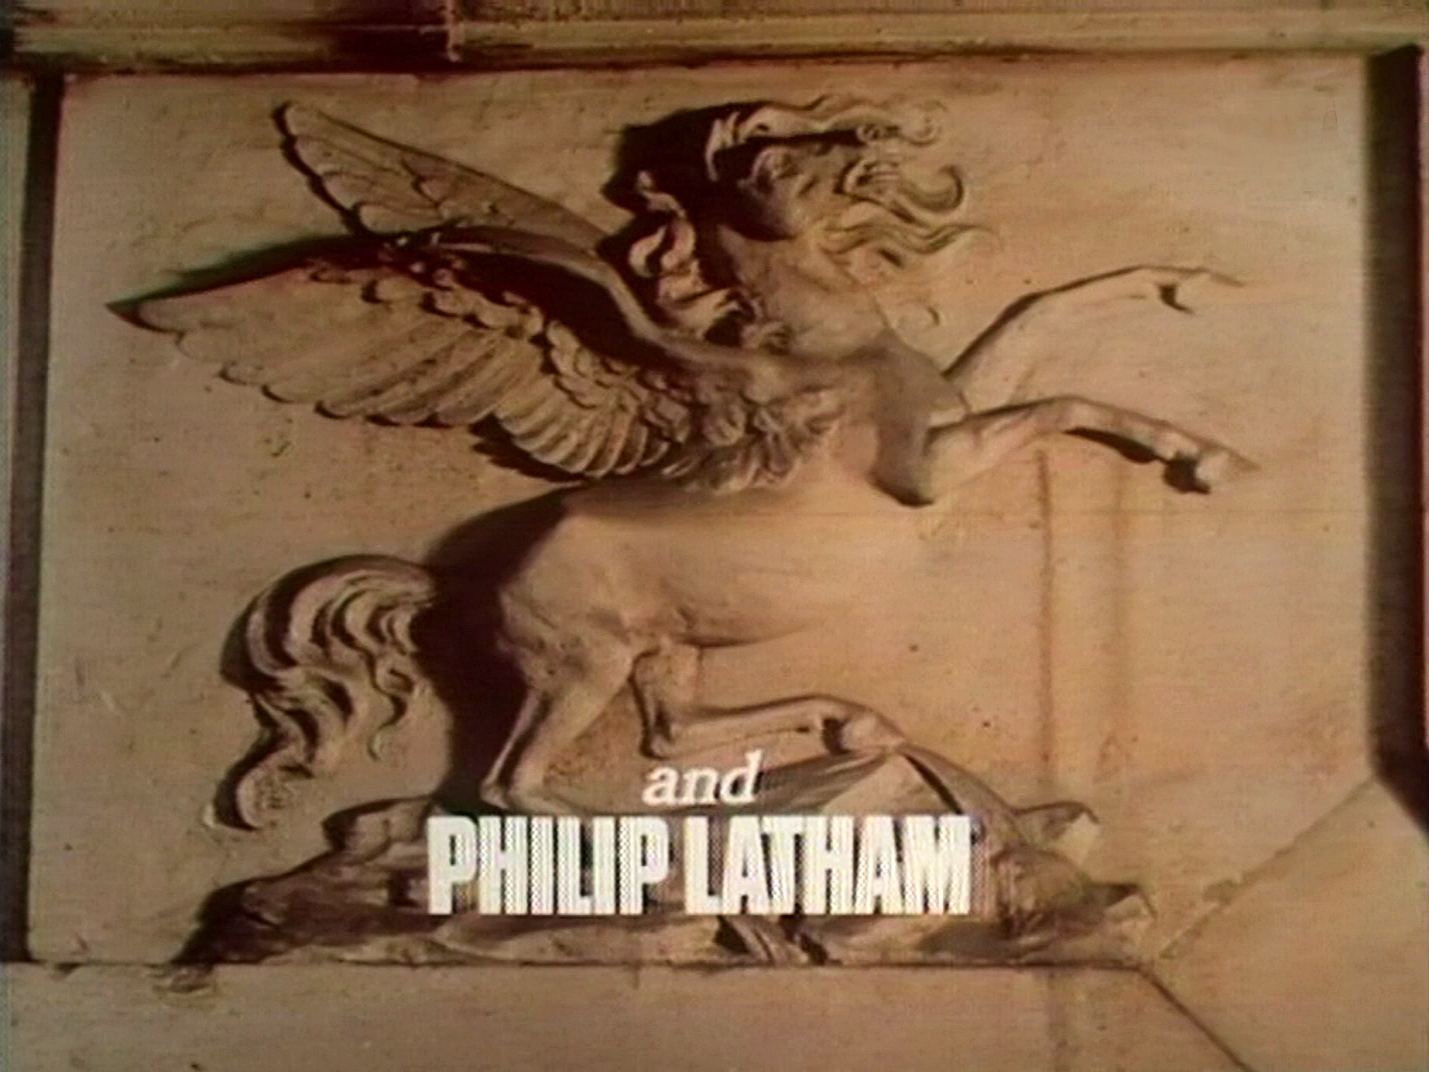 Main title from the ‘The Most Important Thing of All’ episode of Justice (1971-74) (5). And Philip Latham